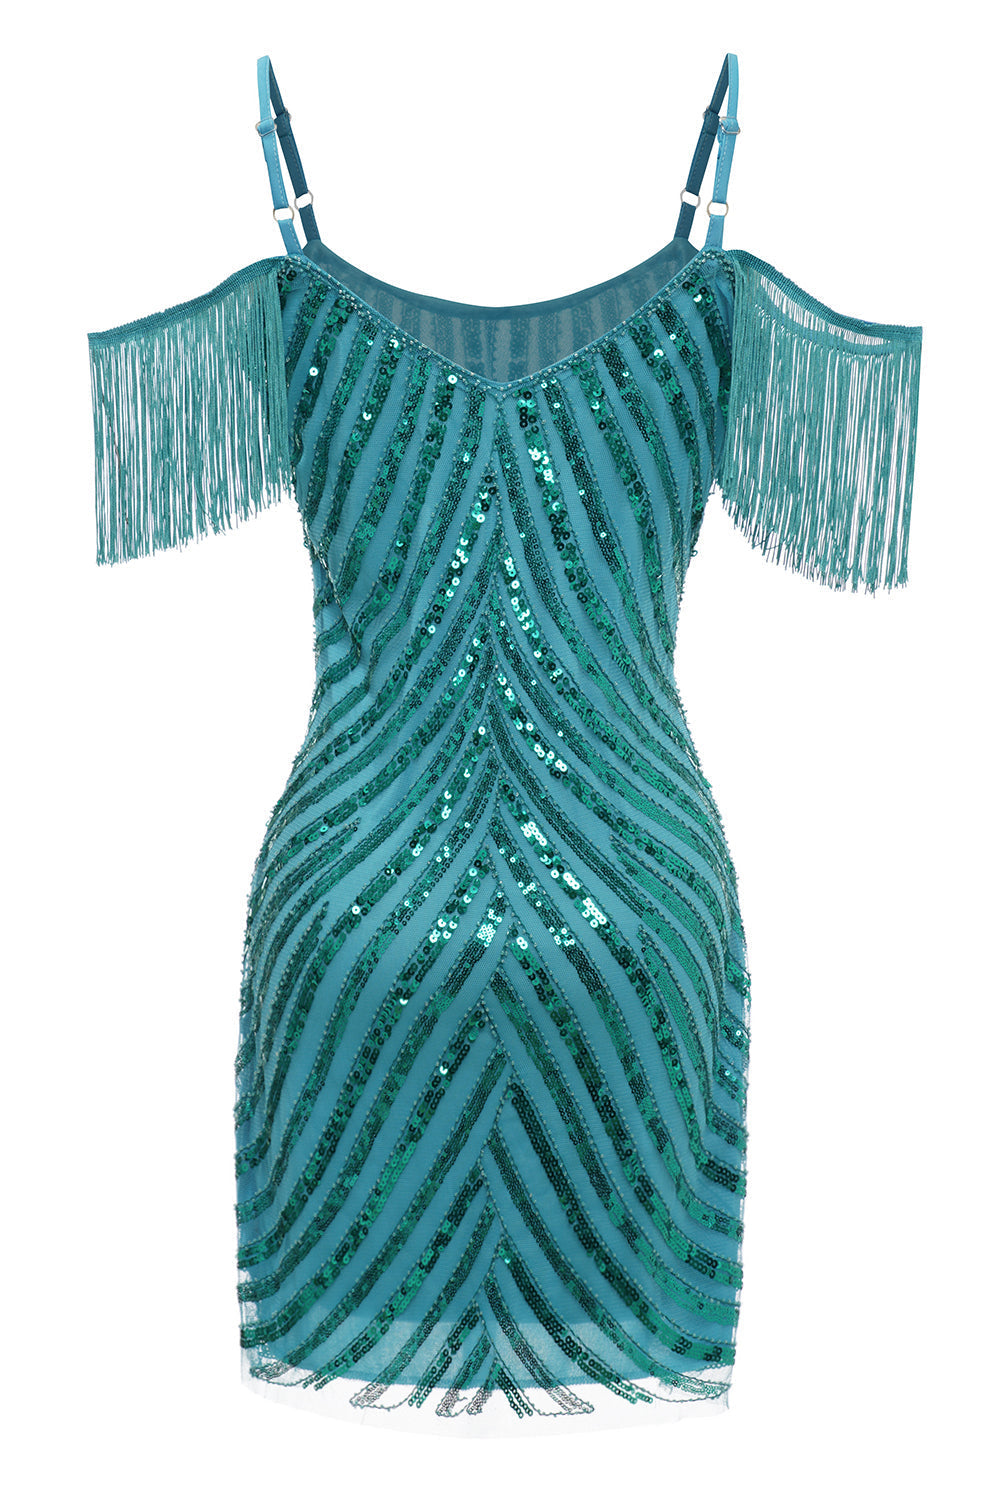 Sparkly Turquoise Tight Sequins Short Homecoming Dress with Fringes